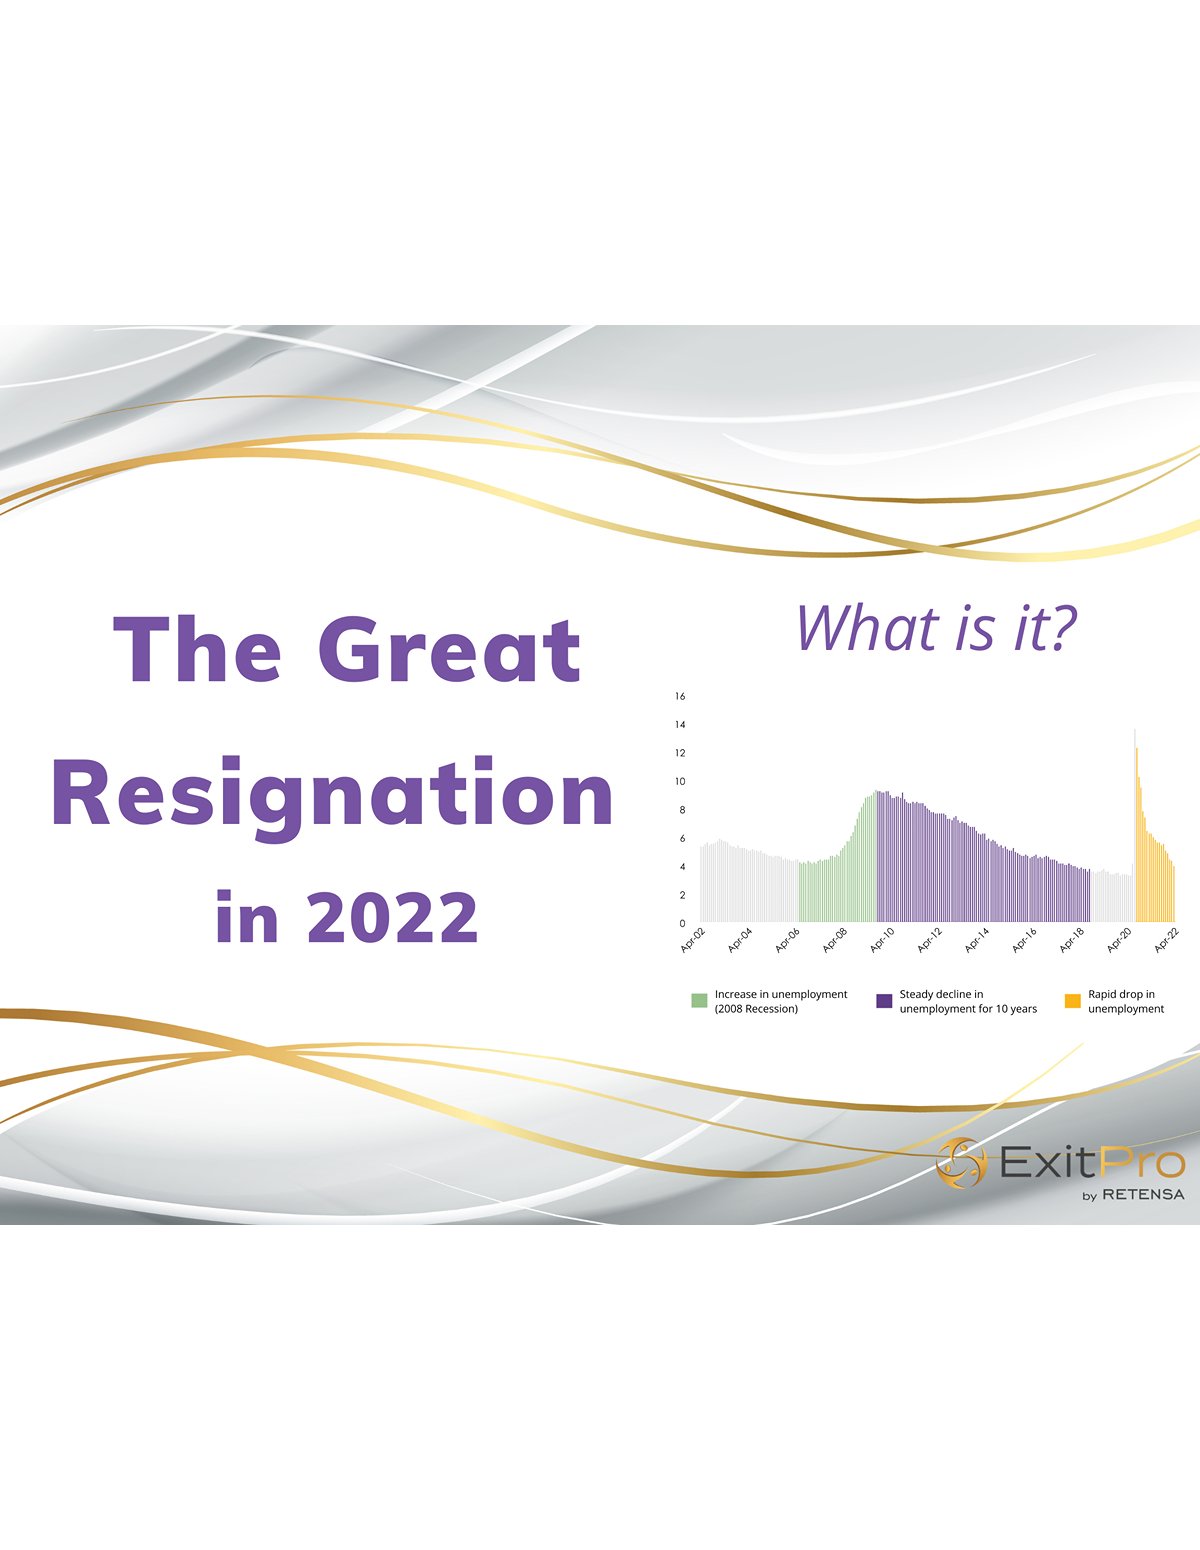 Great Resignation Infographic Part 1: “What is it?”